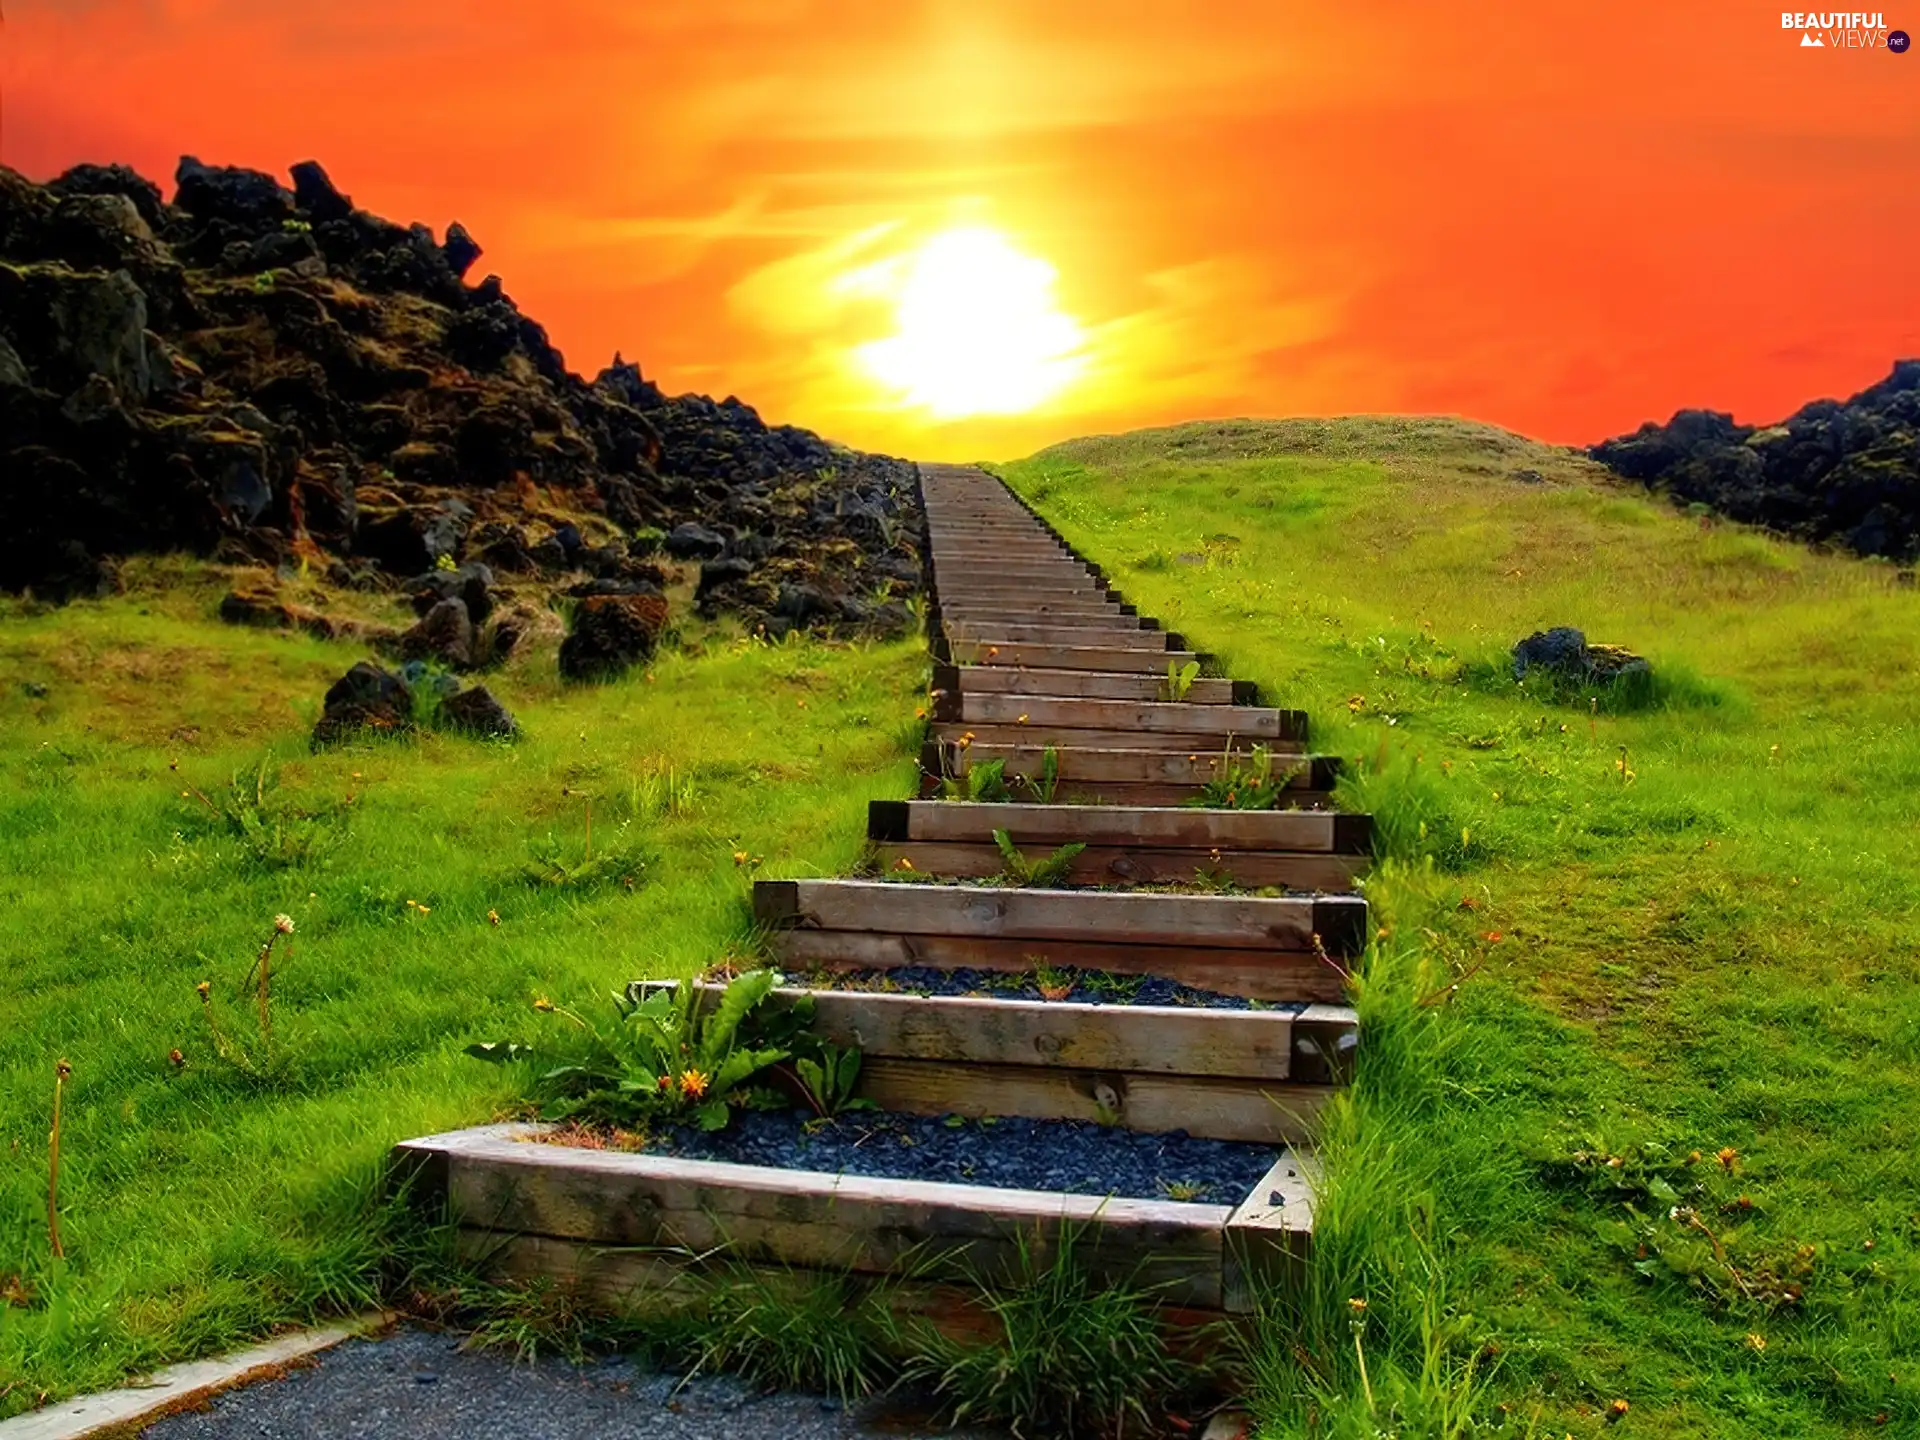 west, Meadow, Stairs, sun